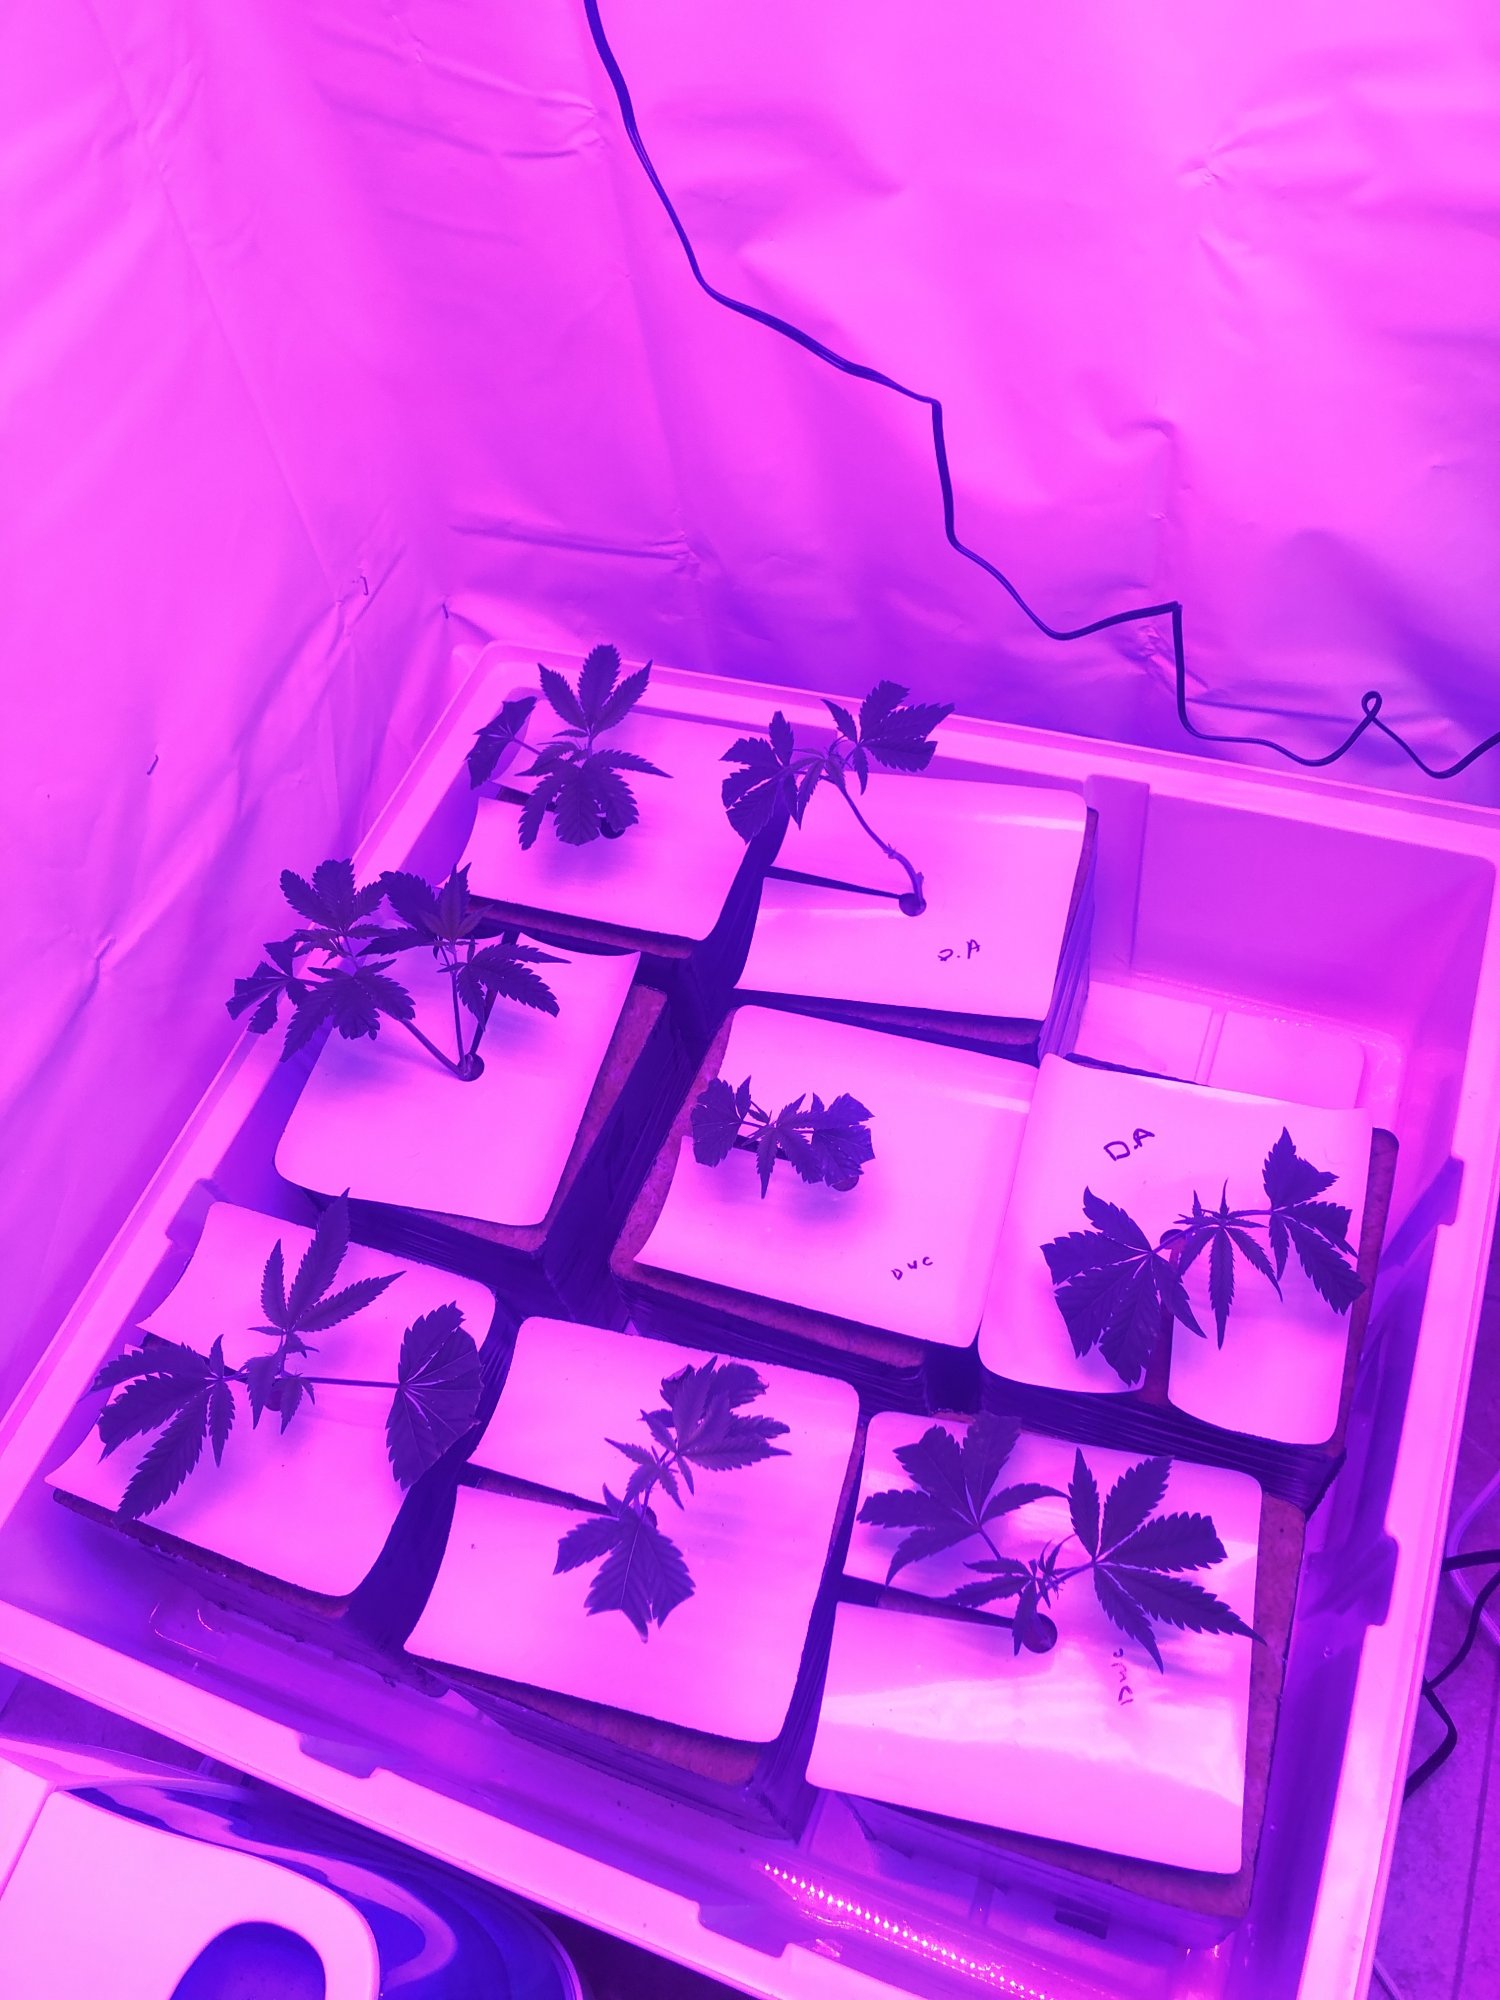 Transplanted the clones  heres an updated picture 3